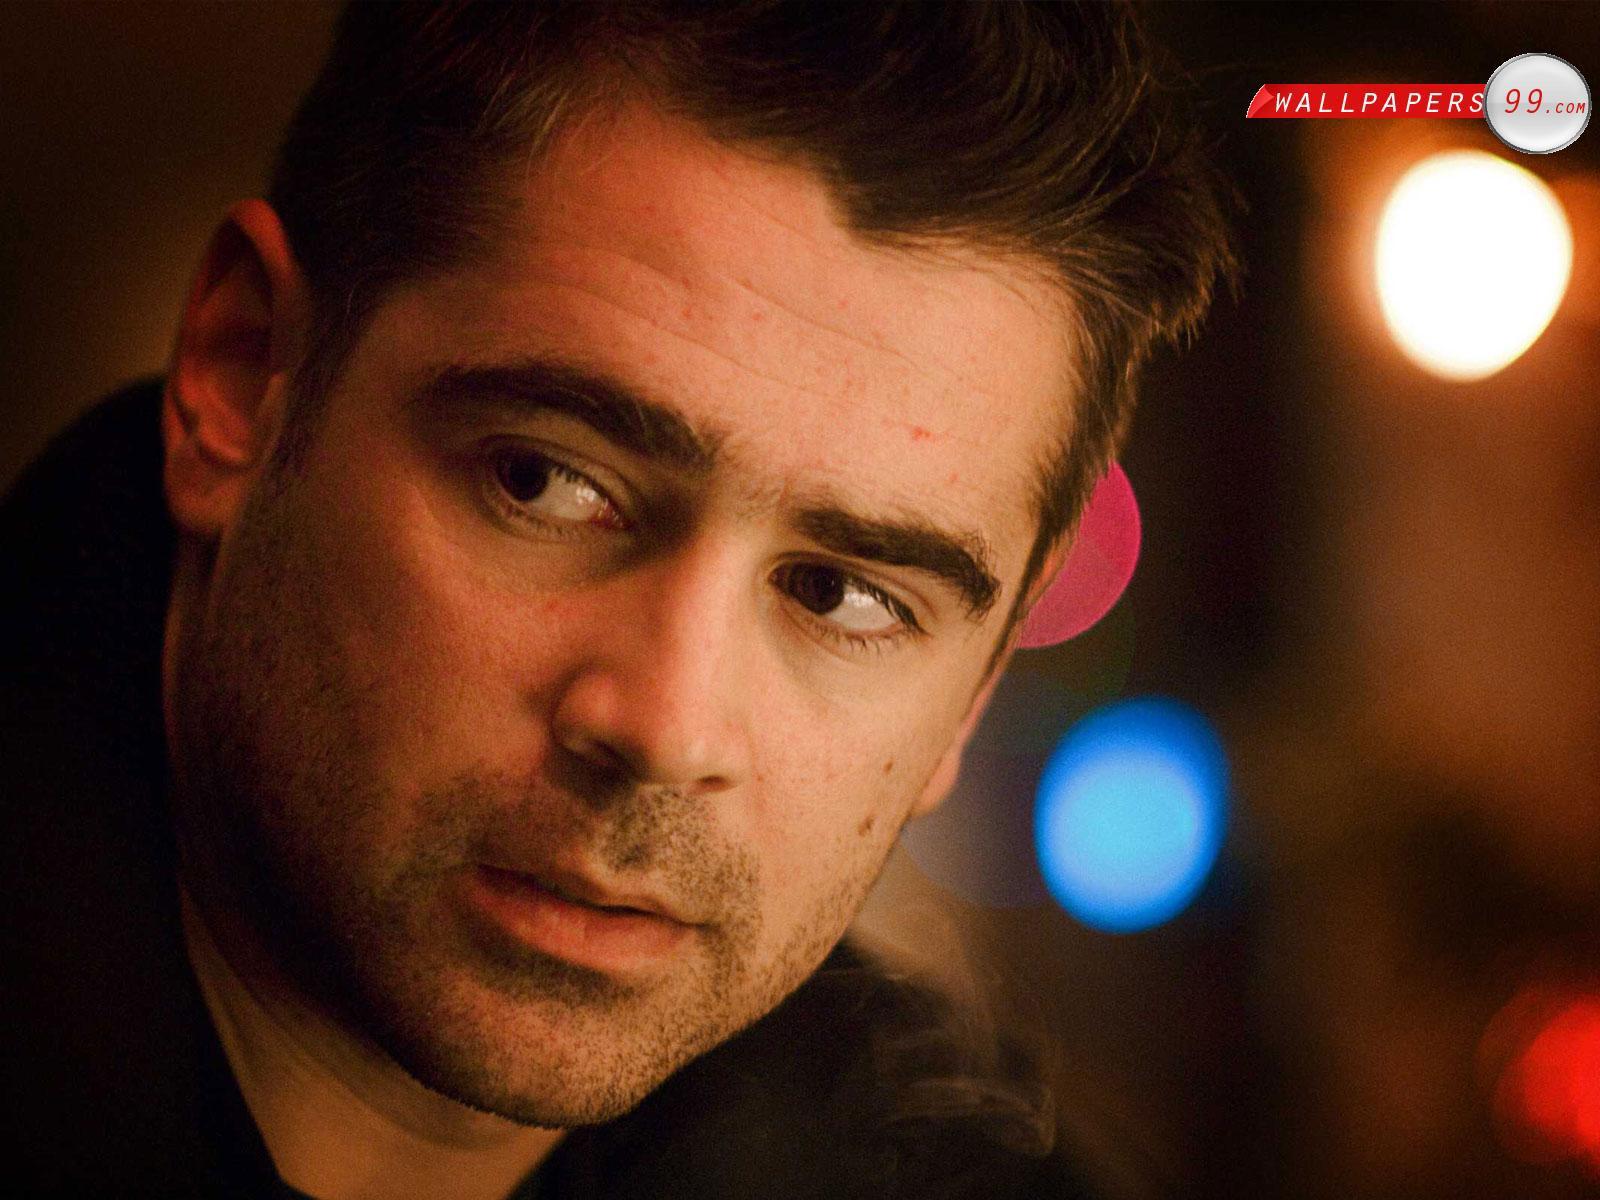 Famous Colin Farrell wallpapers and image